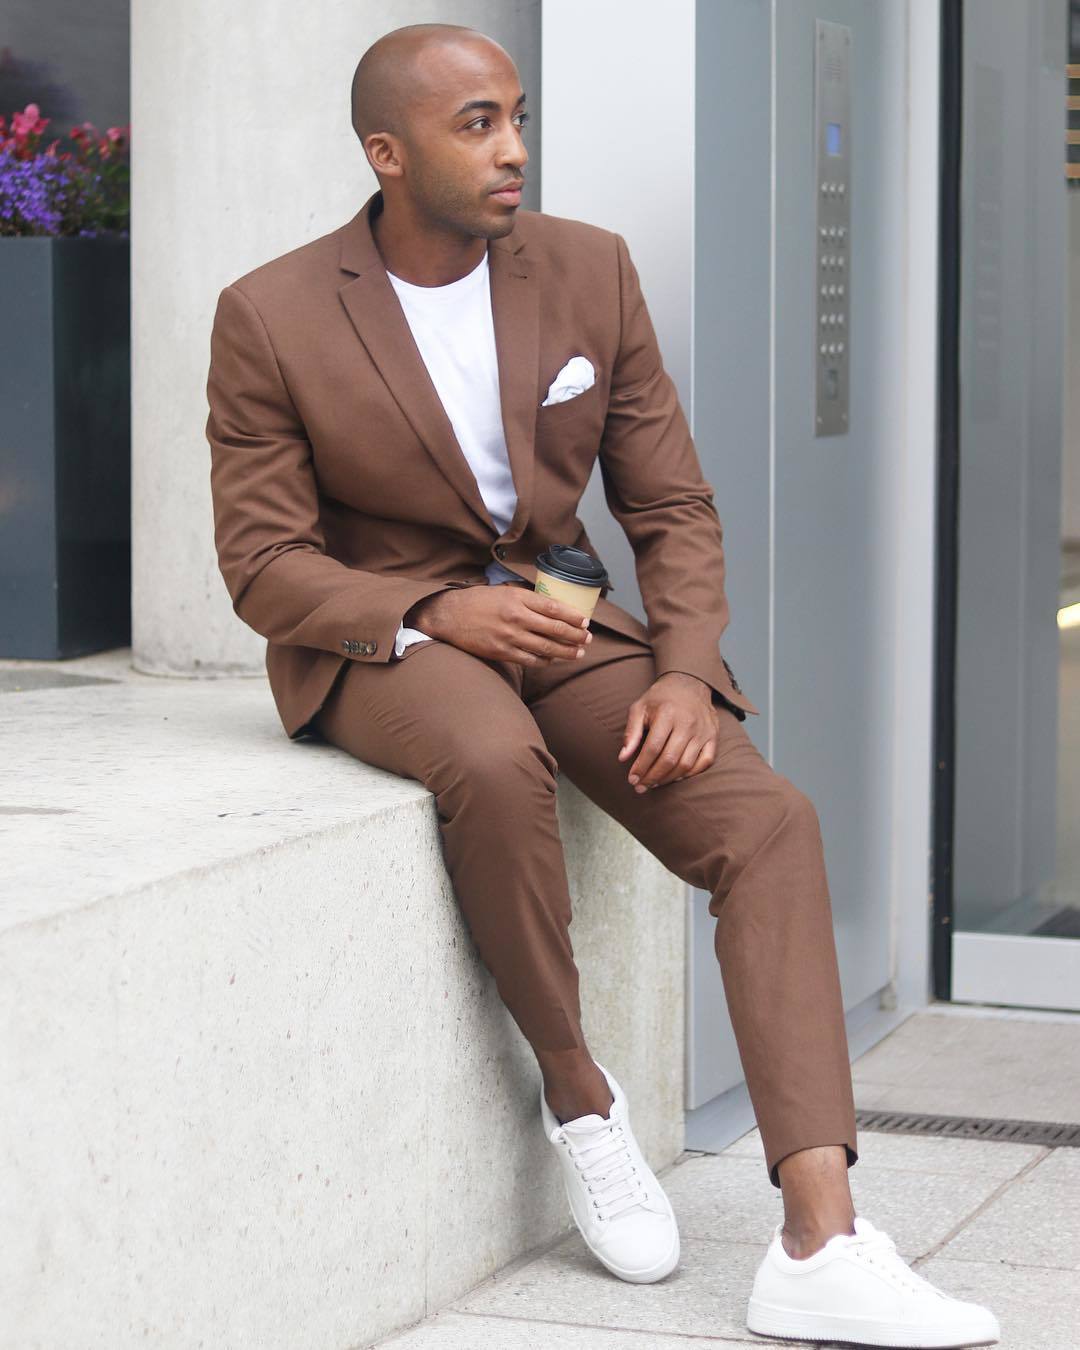 How To Wear A Suit With Sneakers | Beyoung Blog